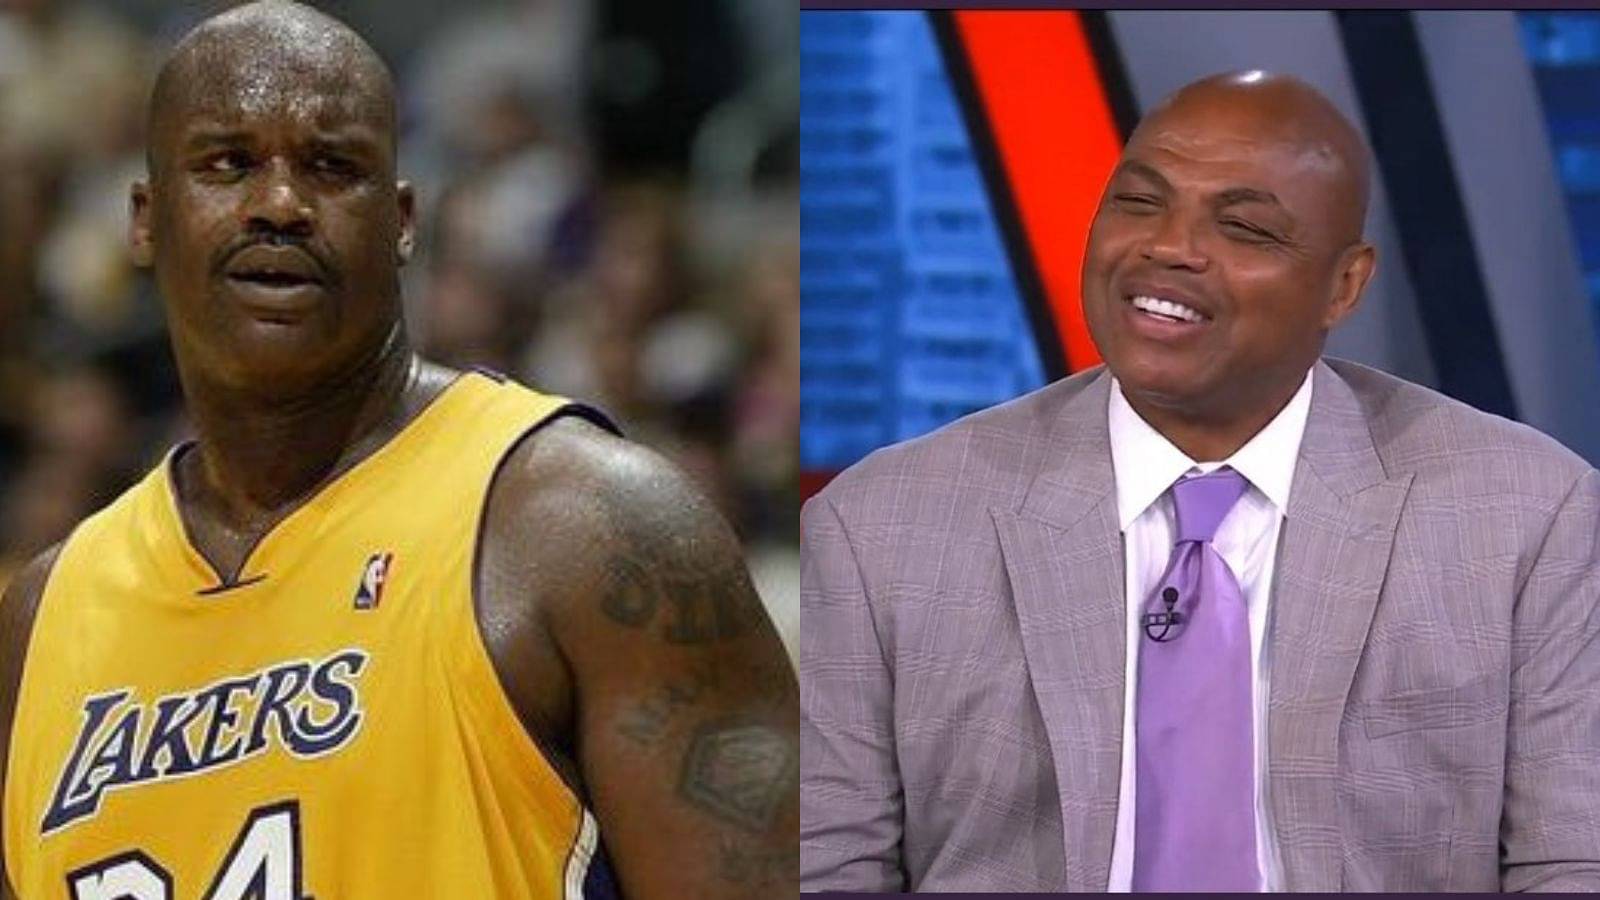 Shaquille O’Neal’s $400 million fortune and legendary NBA career can’t make Charles Barkley call him ‘Superman’